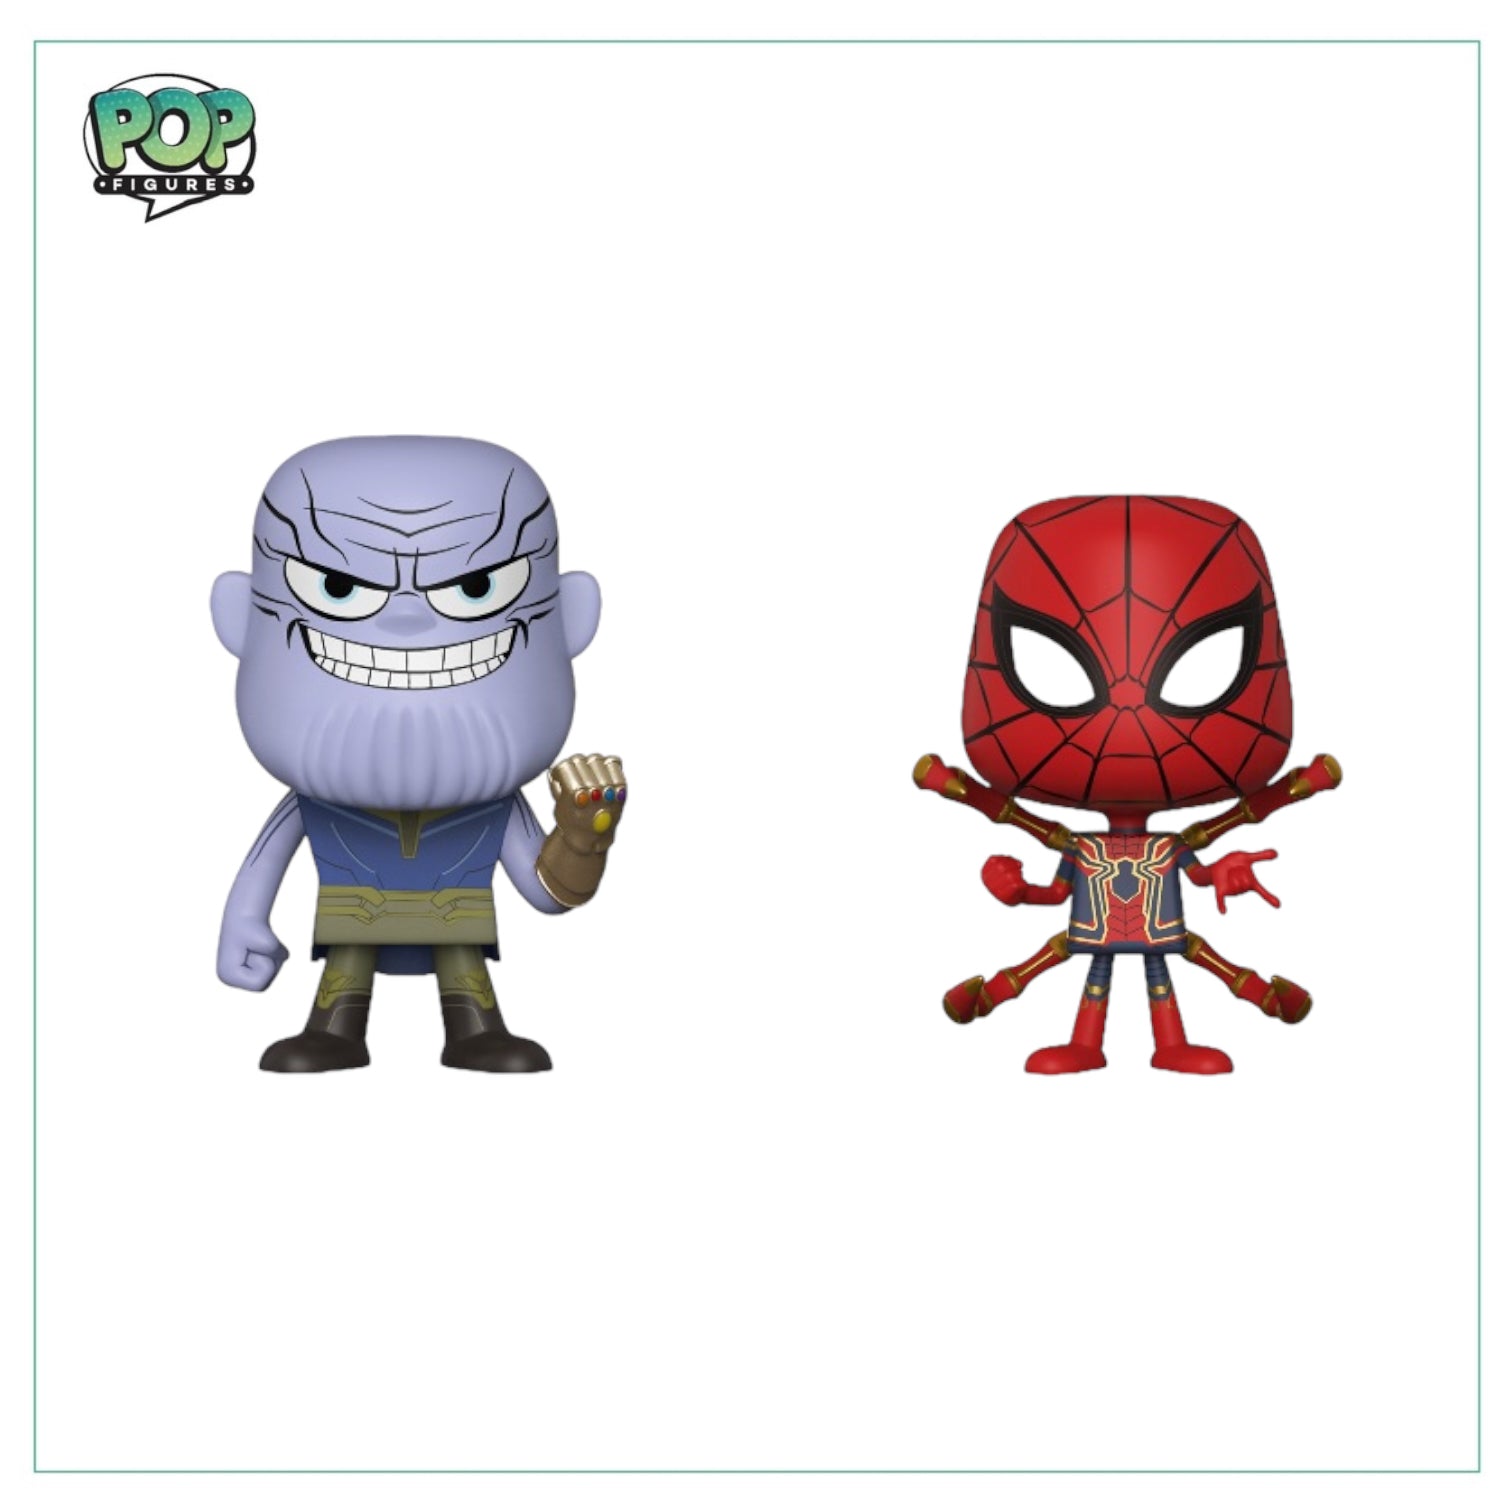 Thanos and Iron Spider 2 Pack Funko Vynl. - Infinity War - Marvel